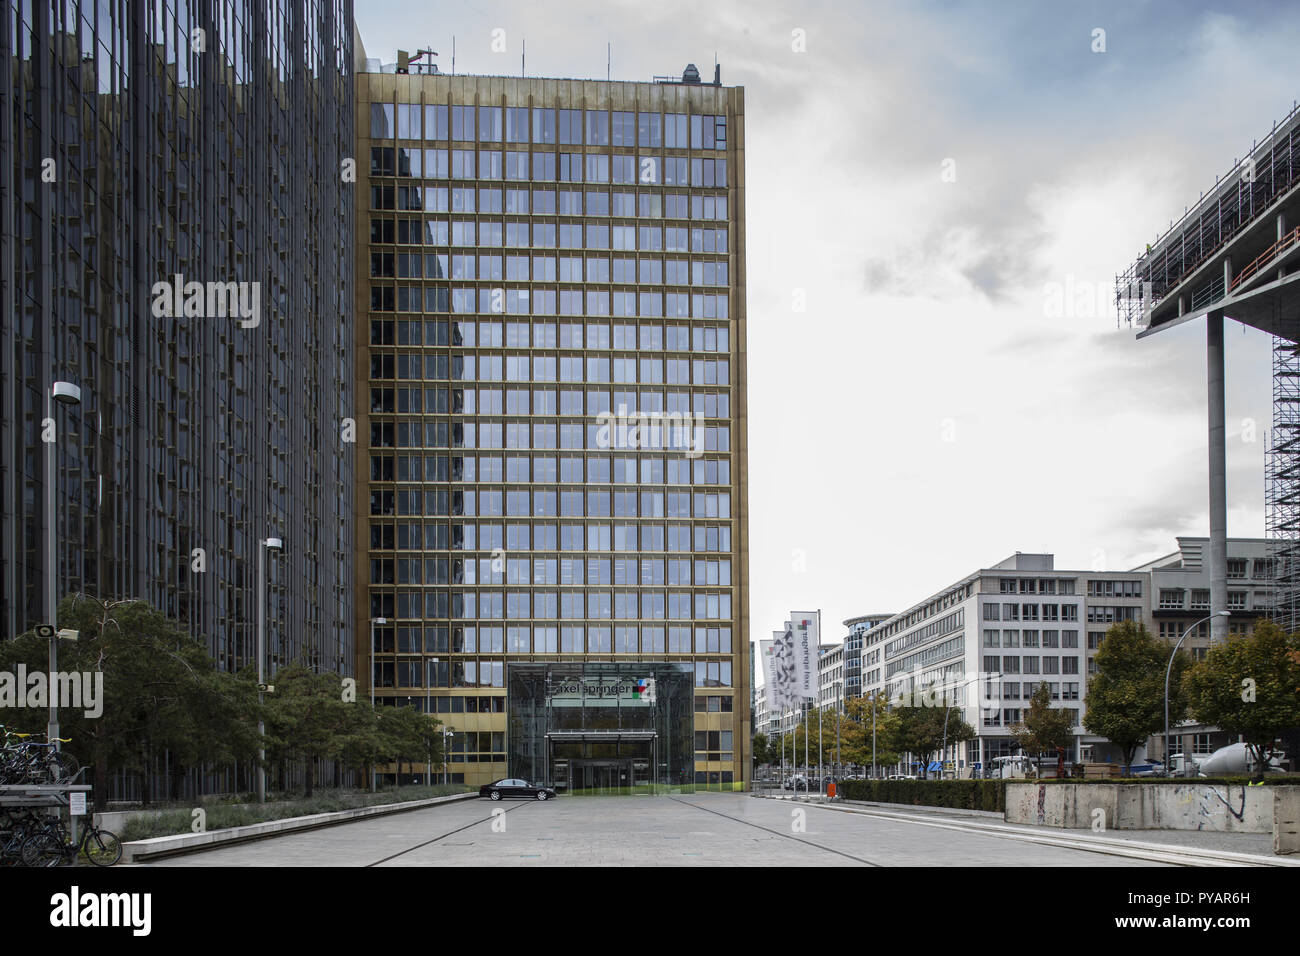 Media Company Axel Springer New Building High Resolution Stock Photography And Images Alamy